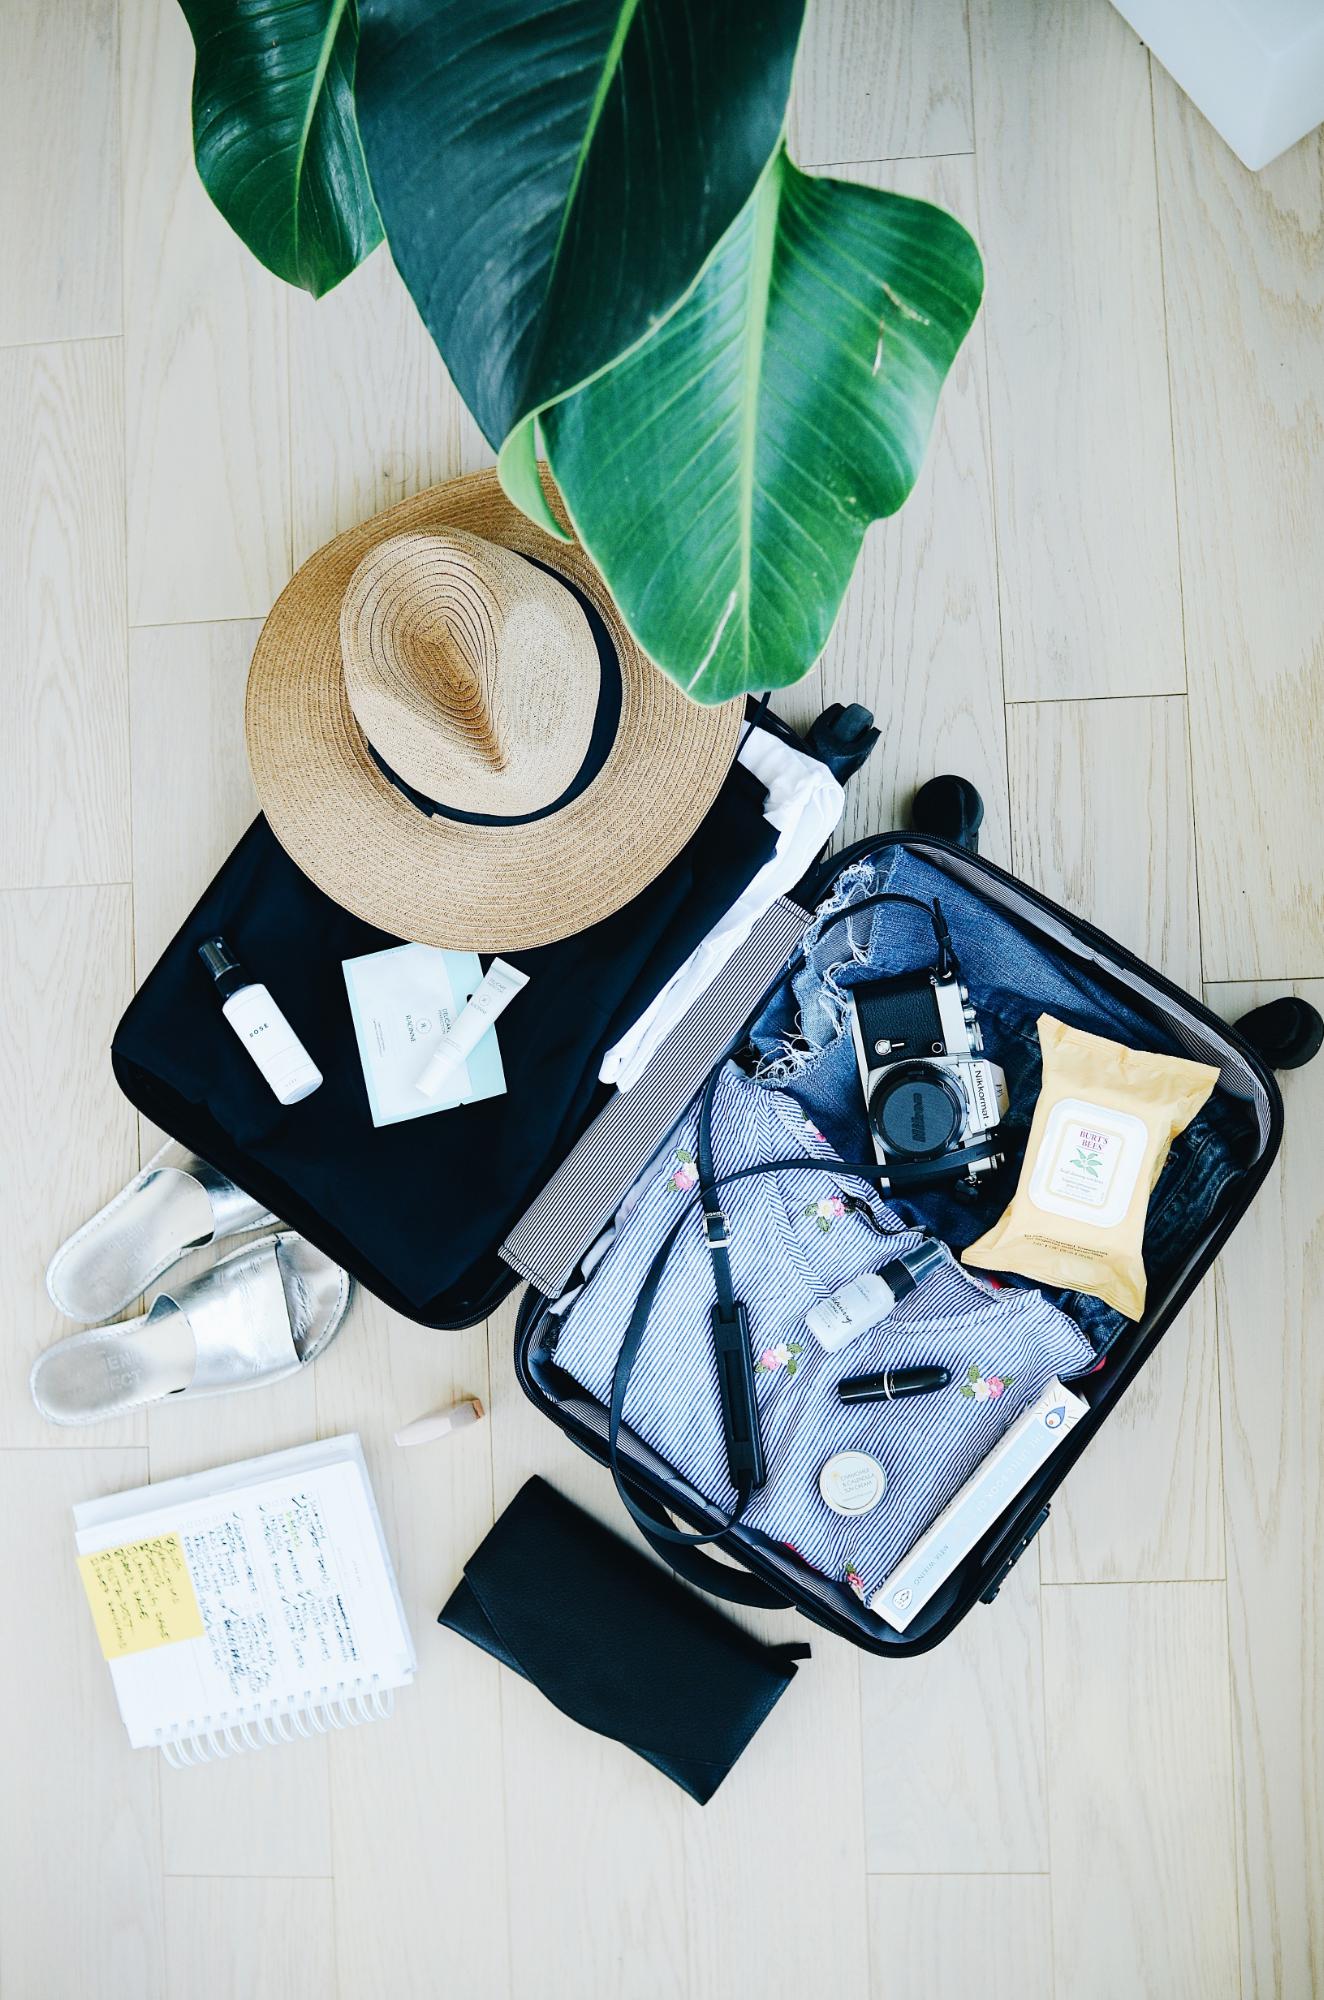 Packing for business trips: the art of stress-free travel